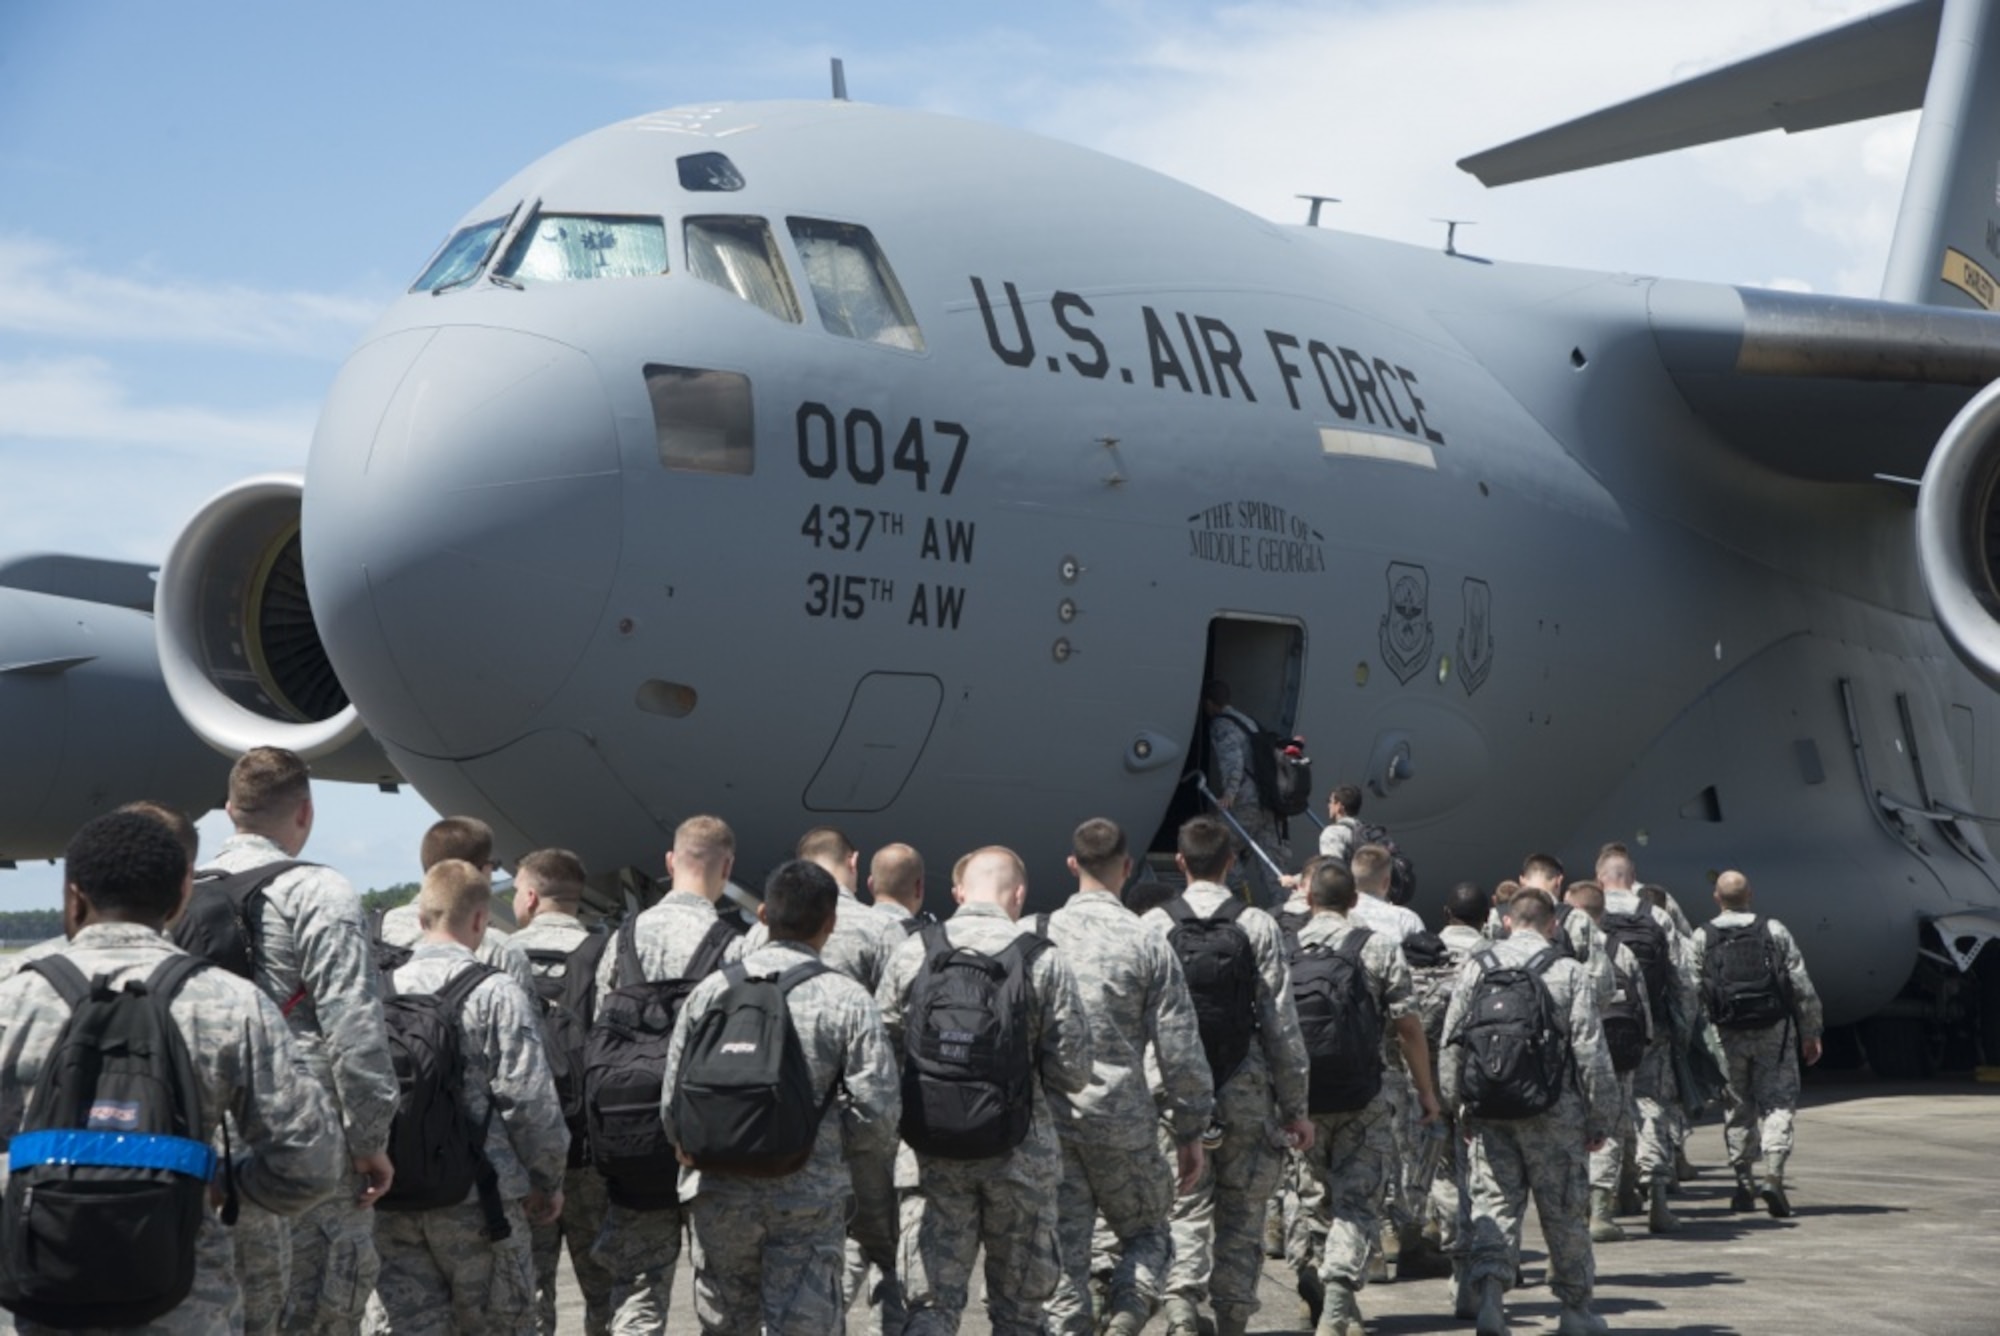 33rd Fighter Wing Airmen board a C-17 Globemaster III Aug. 19, 2016, at Eglin Air Force Base, Fla. The C-17 transported 33rd FW members to Volk Field, Wis. to take part in Northern Lightning, a tactical-level, joint training exercise that emphasizes fifth and fourth generation assets engaged in a contested, degraded environment. (U.S. Air Force photo by Senior Airman Stormy Archer)